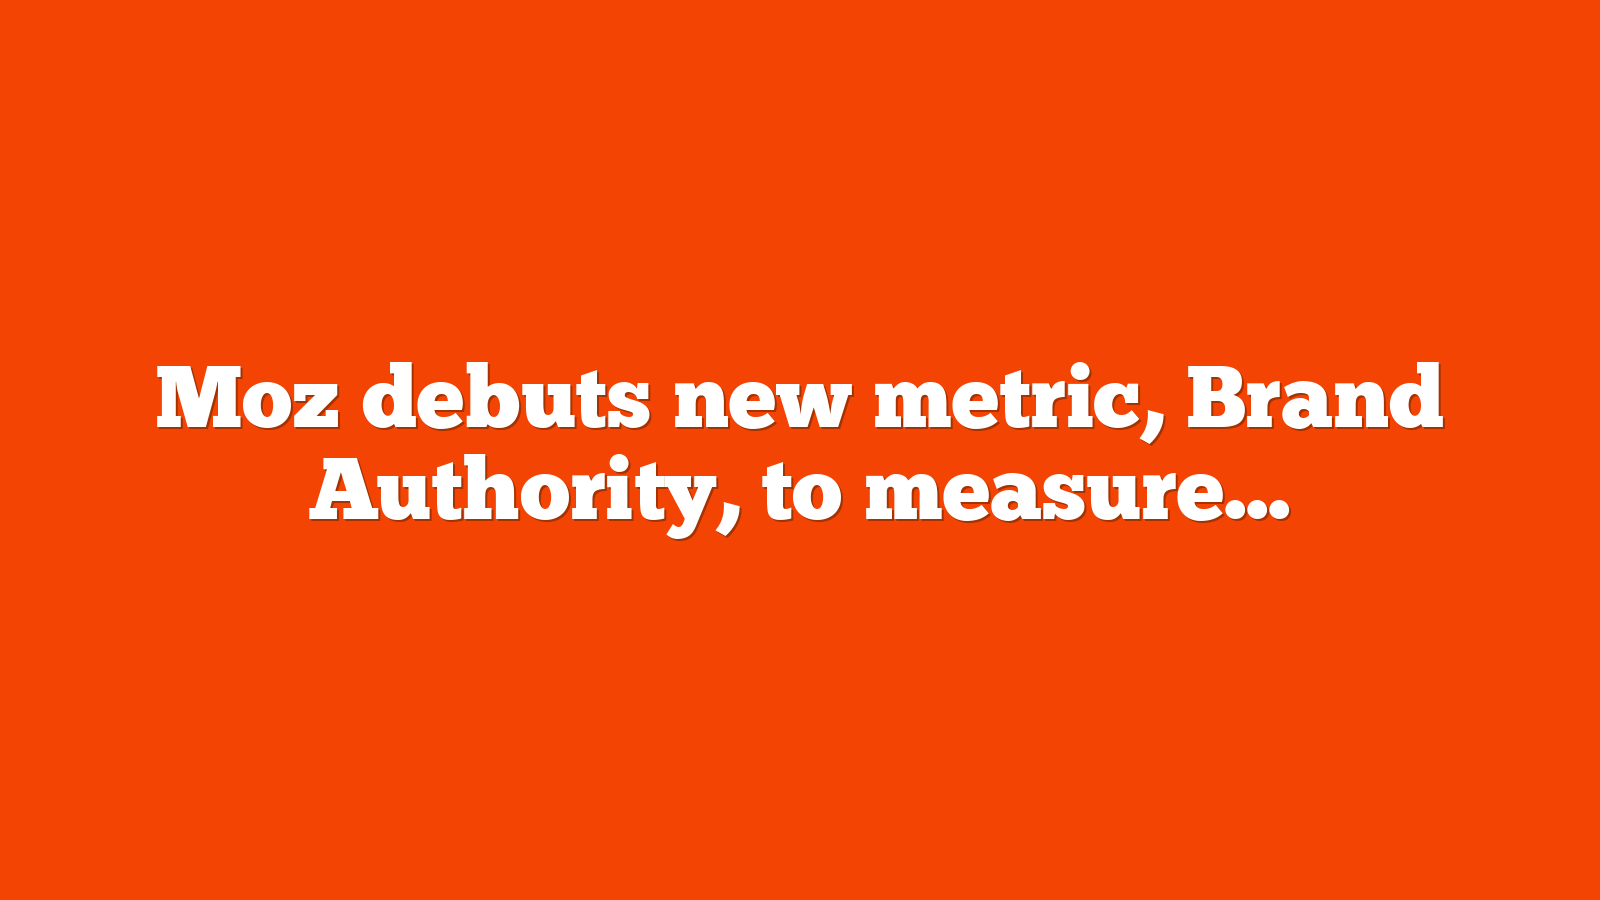 Moz debuts new metric Brand Authority to measure brand strength